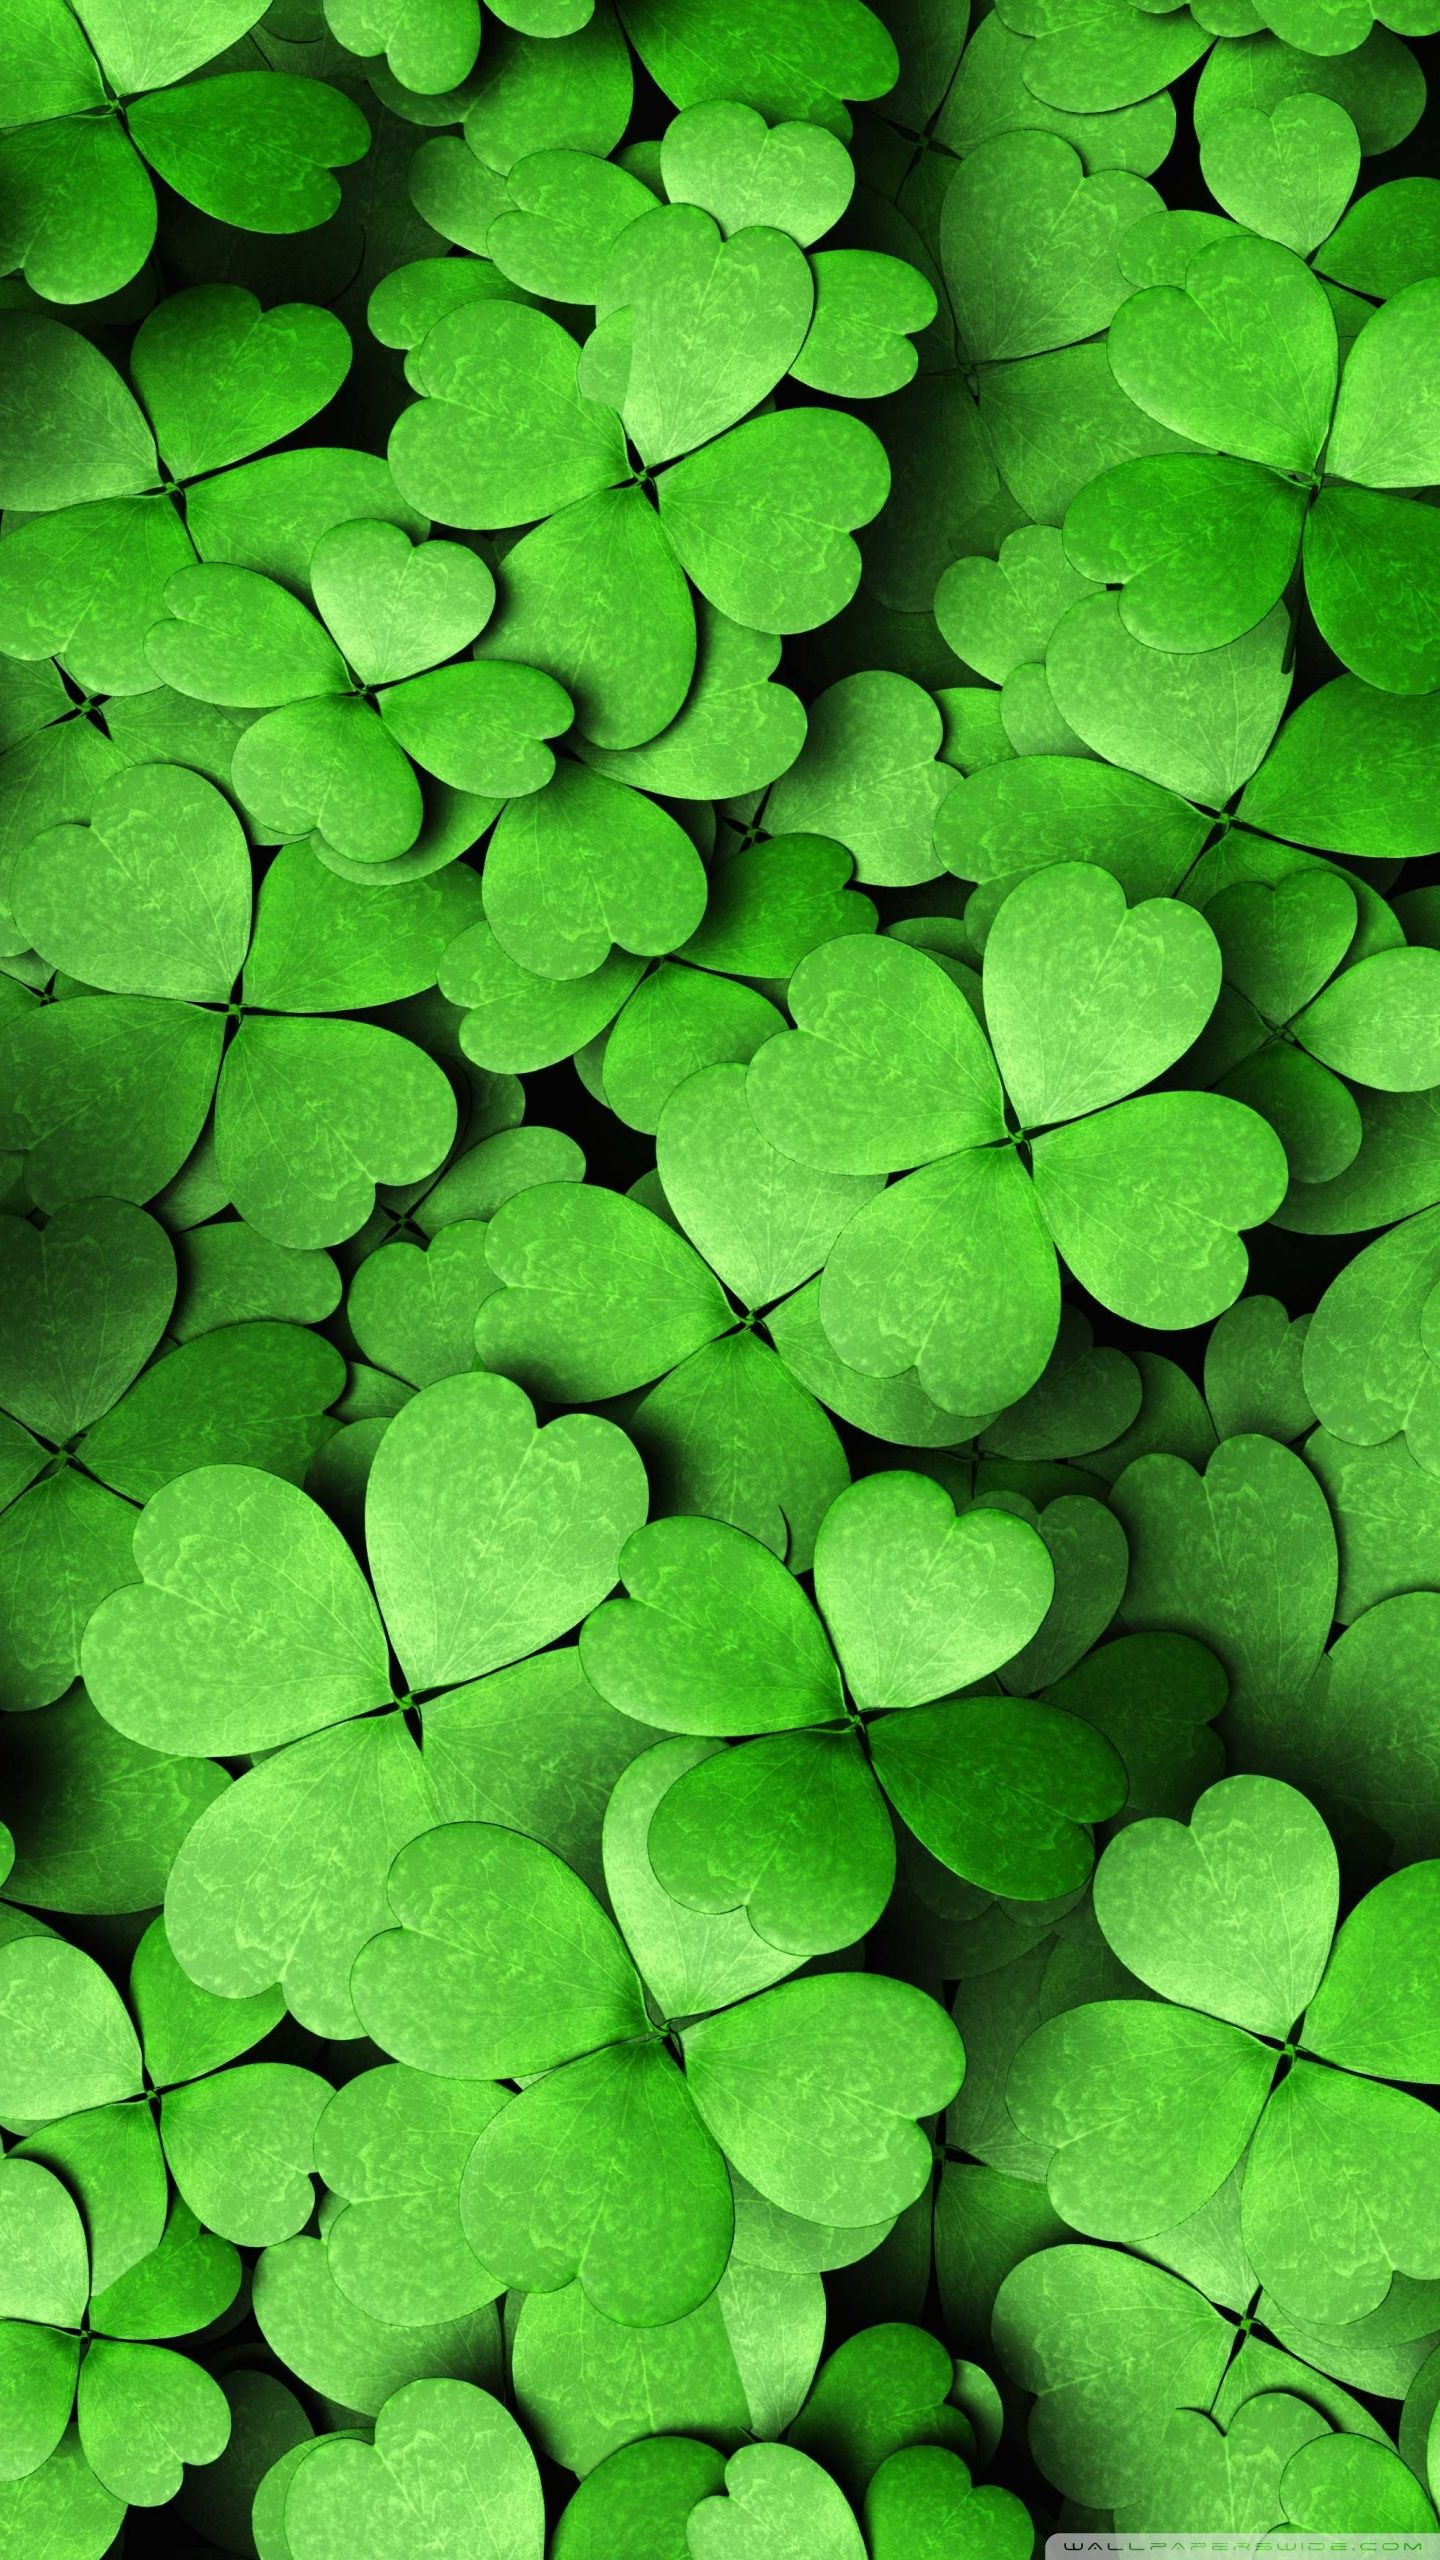 47 android 4 leaves clover wallpapers on wallpapersafari 47 android 4 leaves clover wallpapers